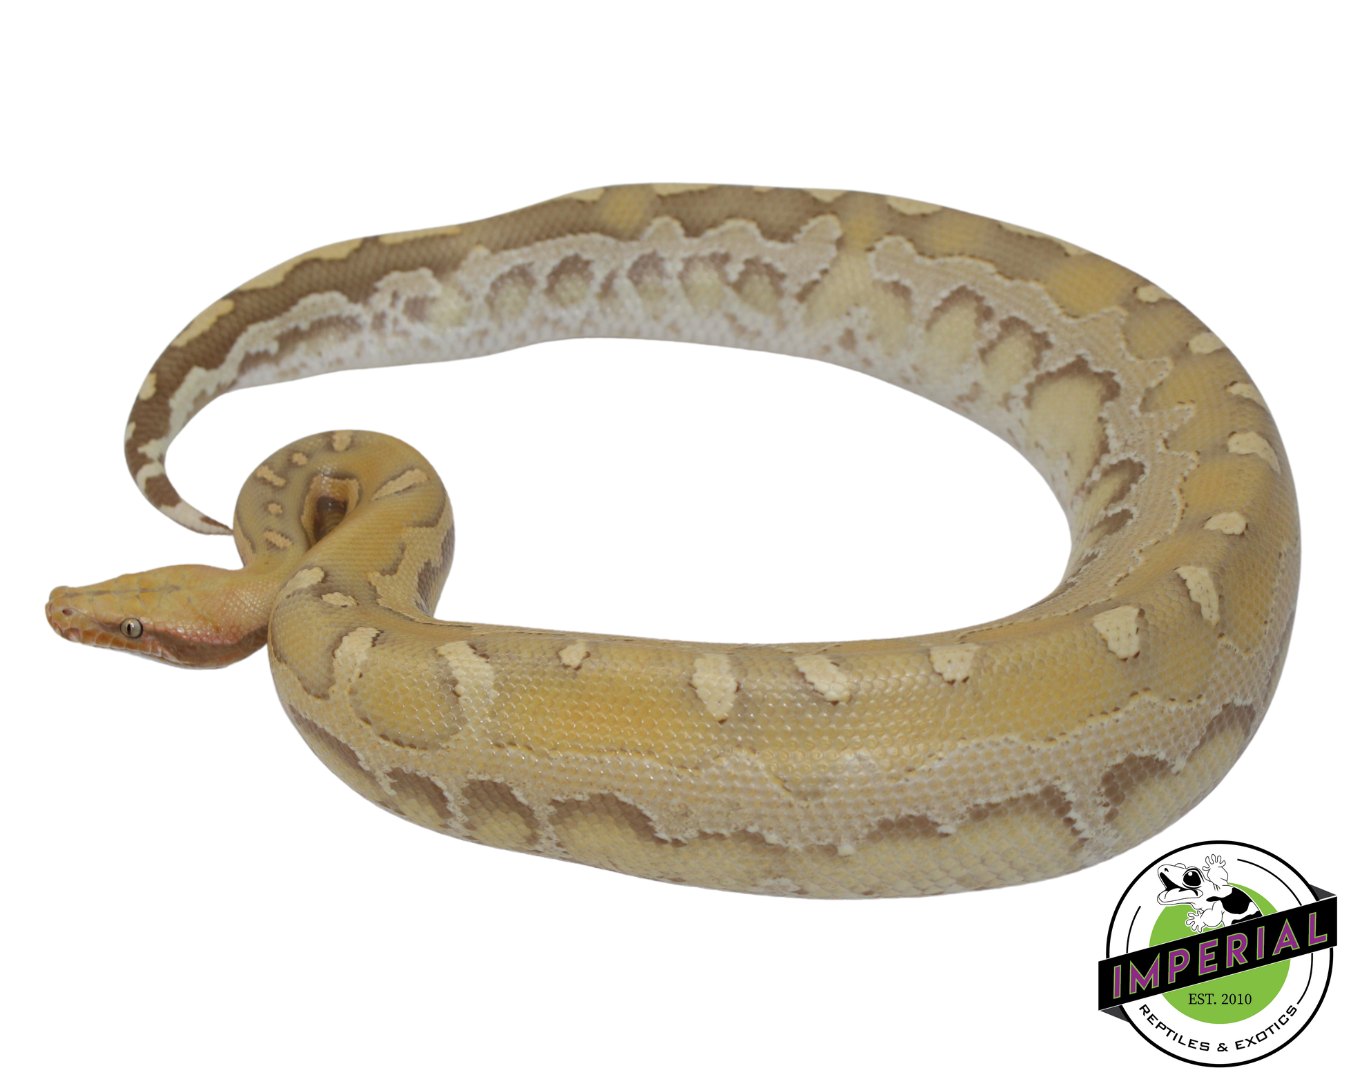 Sunset borneo short tail python for sale, buy reptiles online